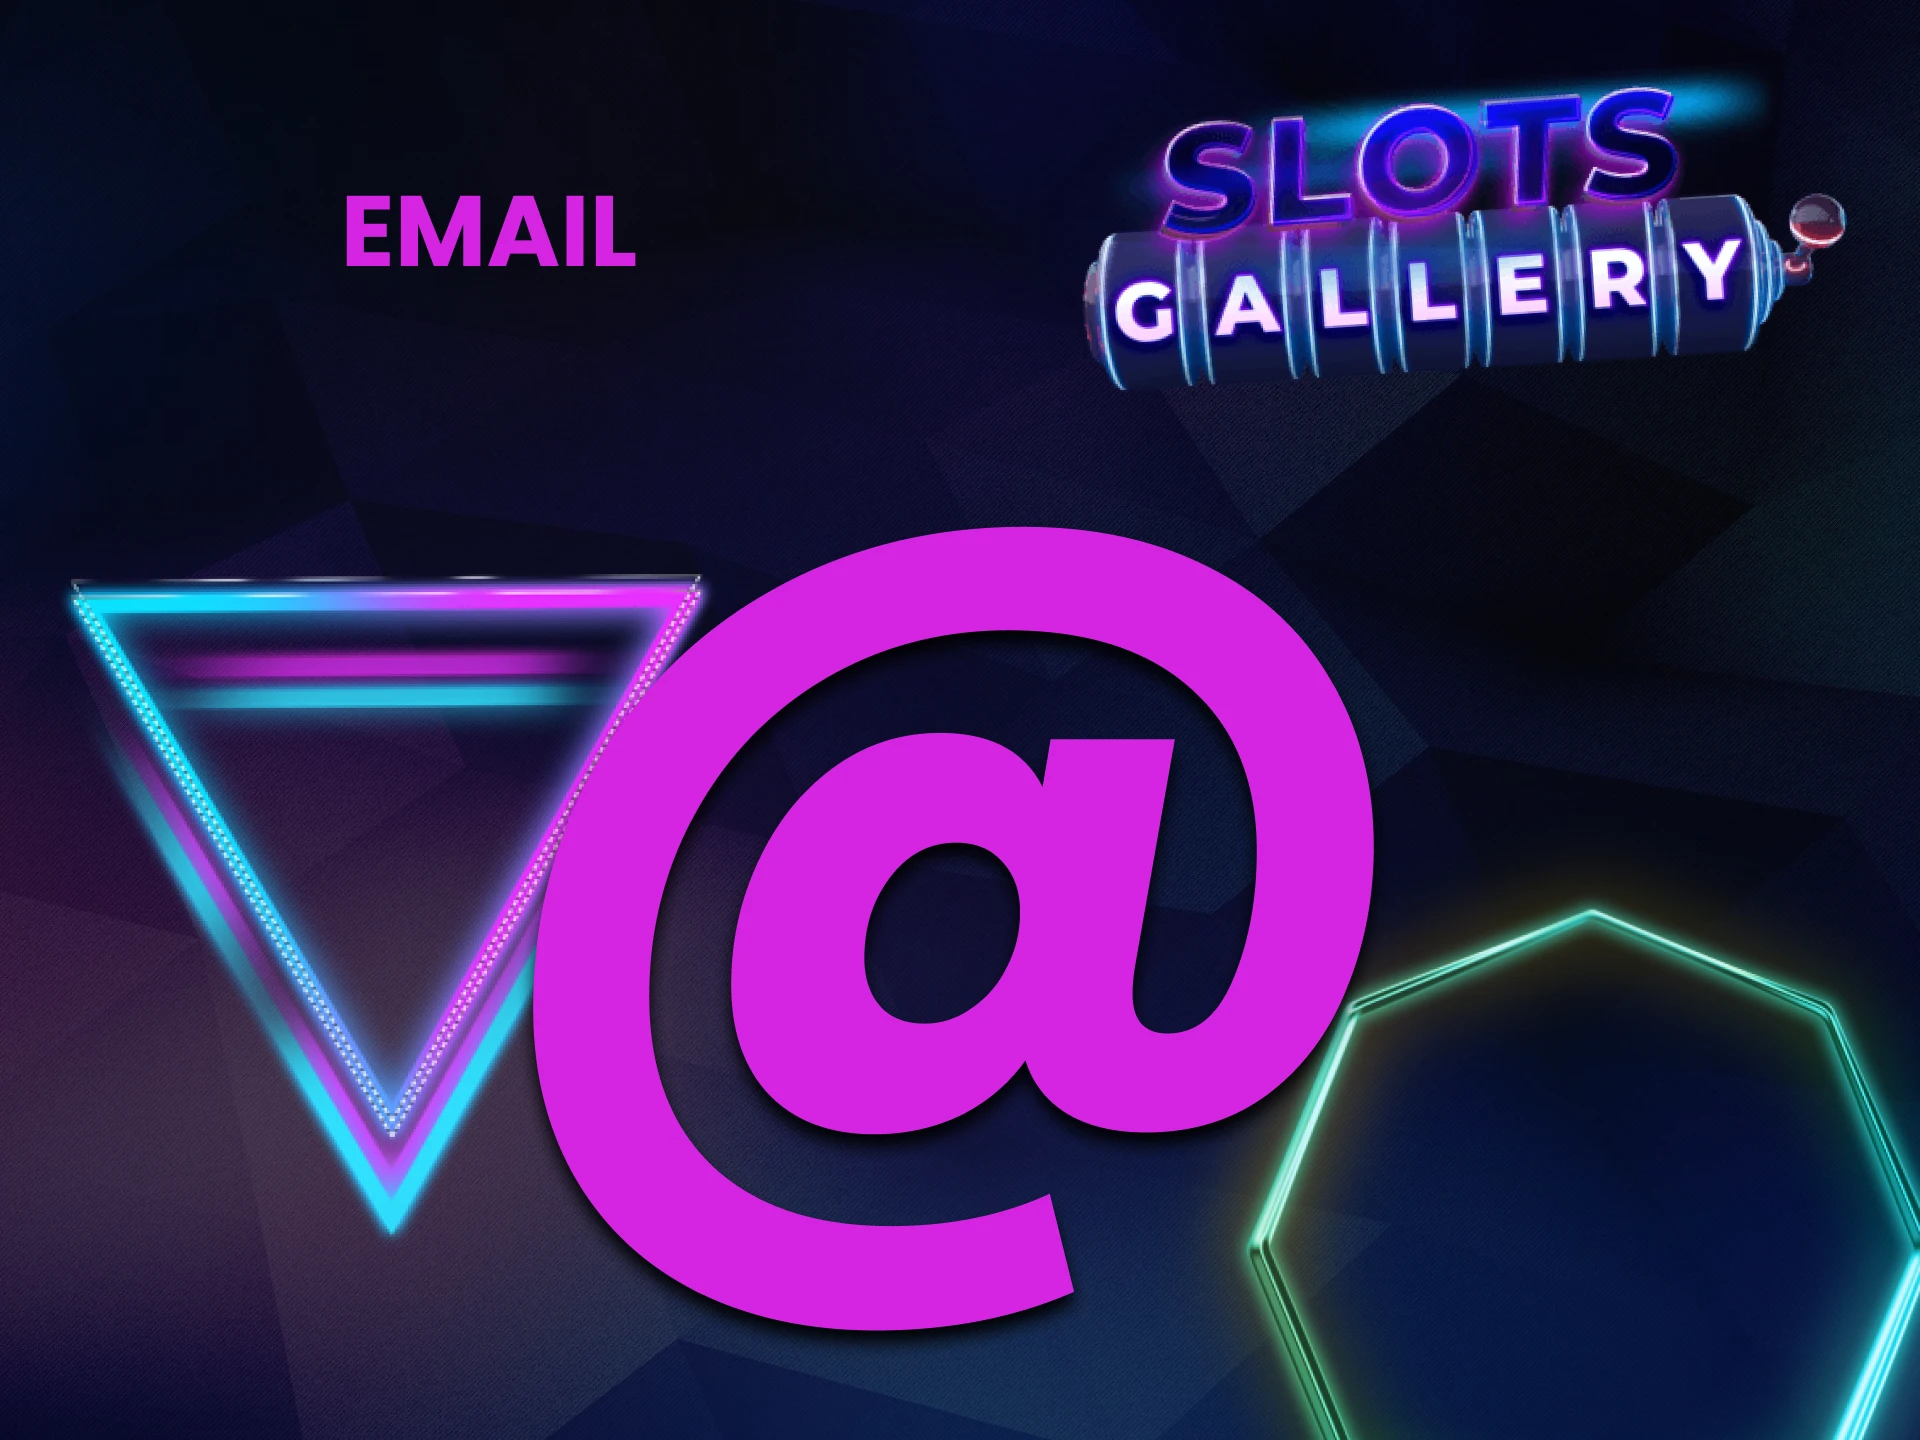 You can contact the Slots Gallery team via email.